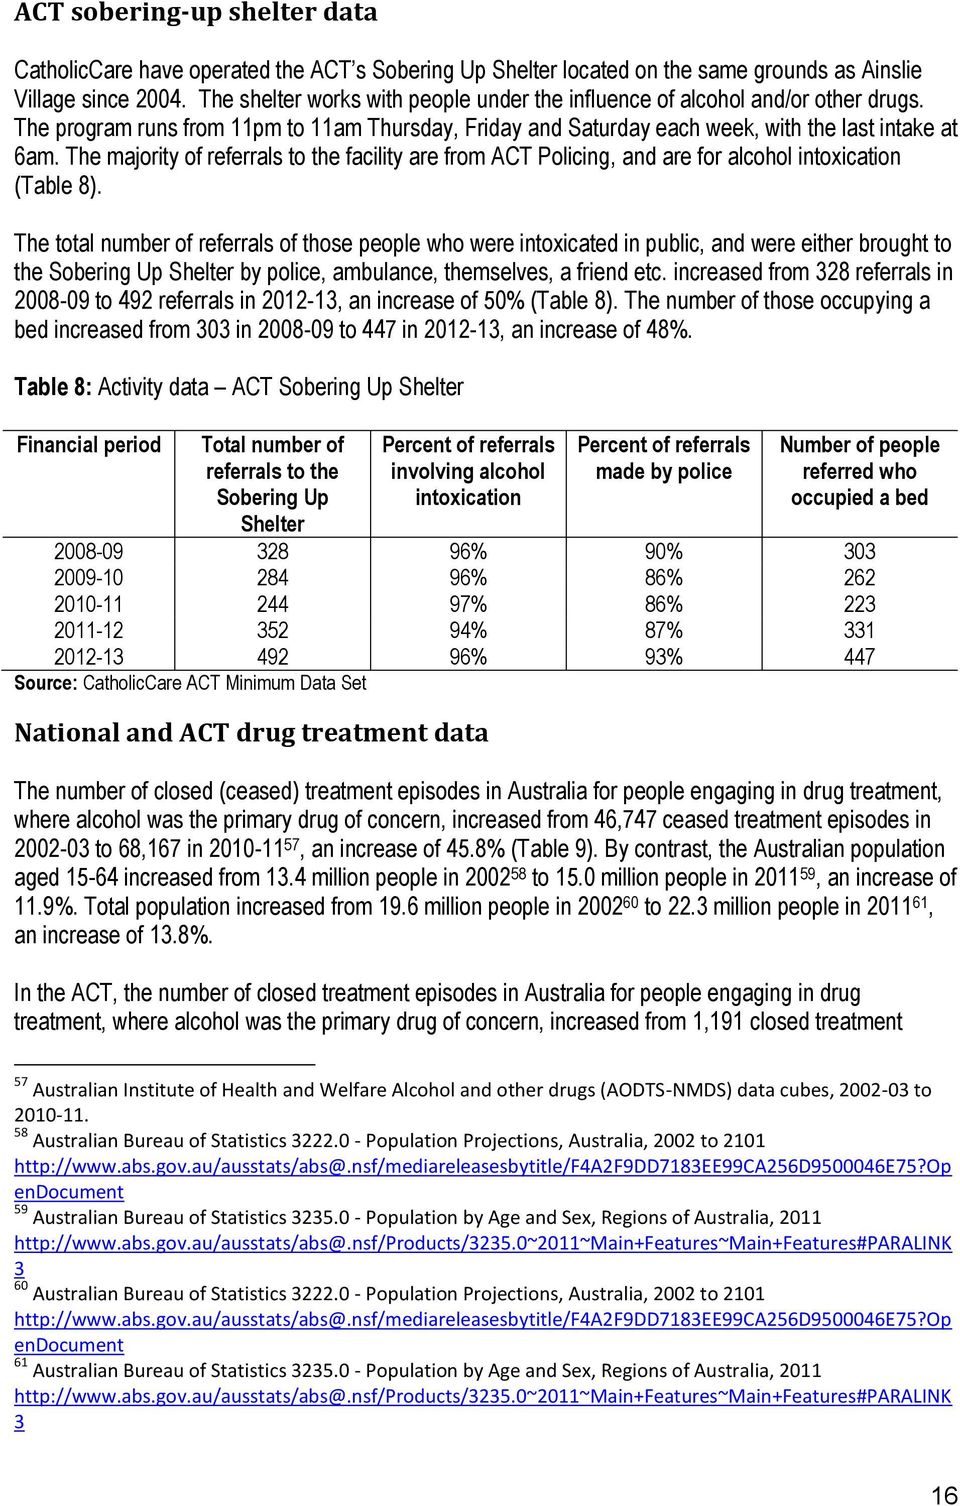 The majority of referrals to the facility are from ACT Policing, and are for alcohol intoxication (Table 8).